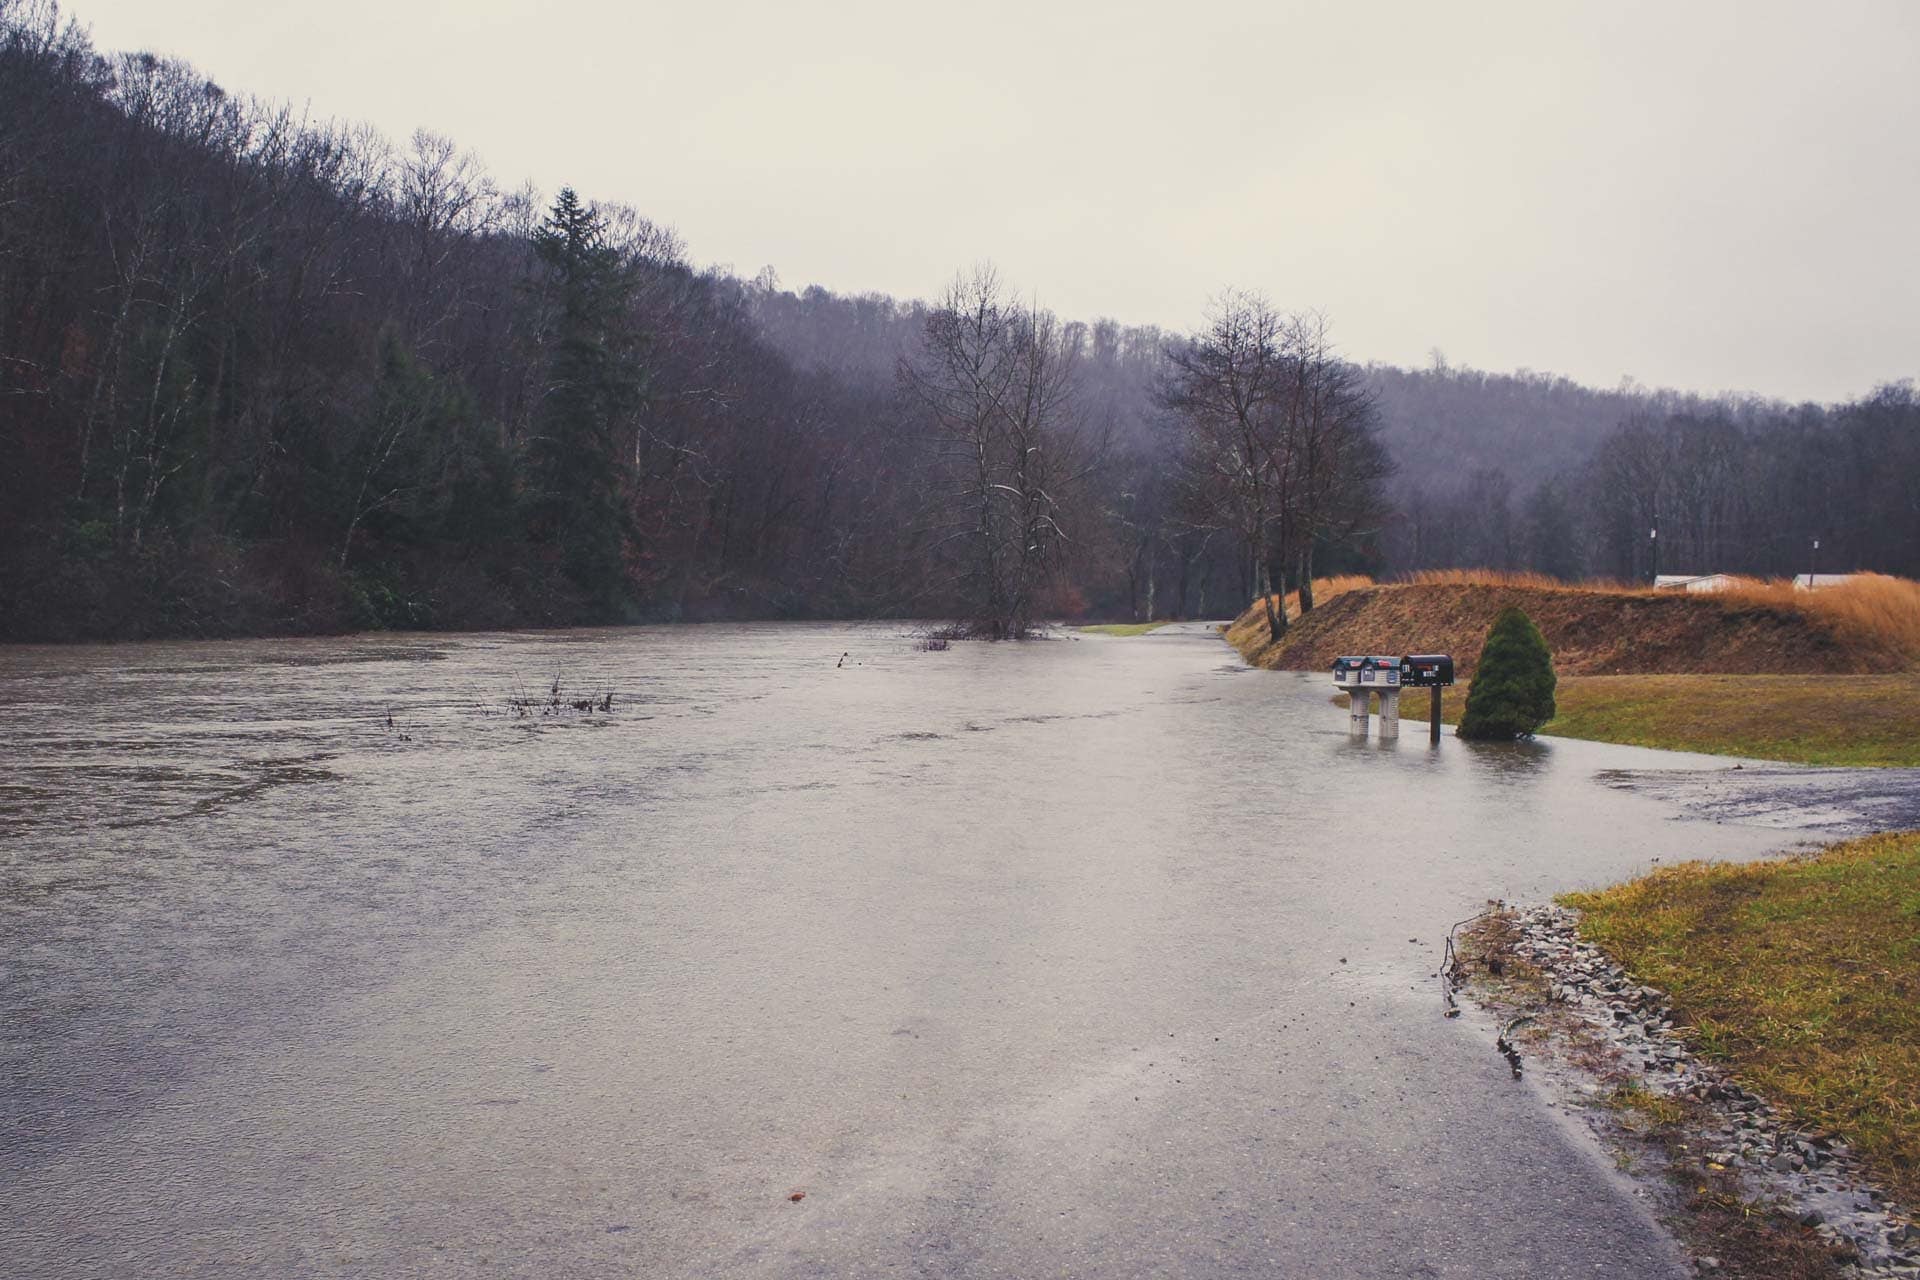 The Middle Fork River covers part of Boy Scout Camp Road, just off of Route 33, Tuesday morning.